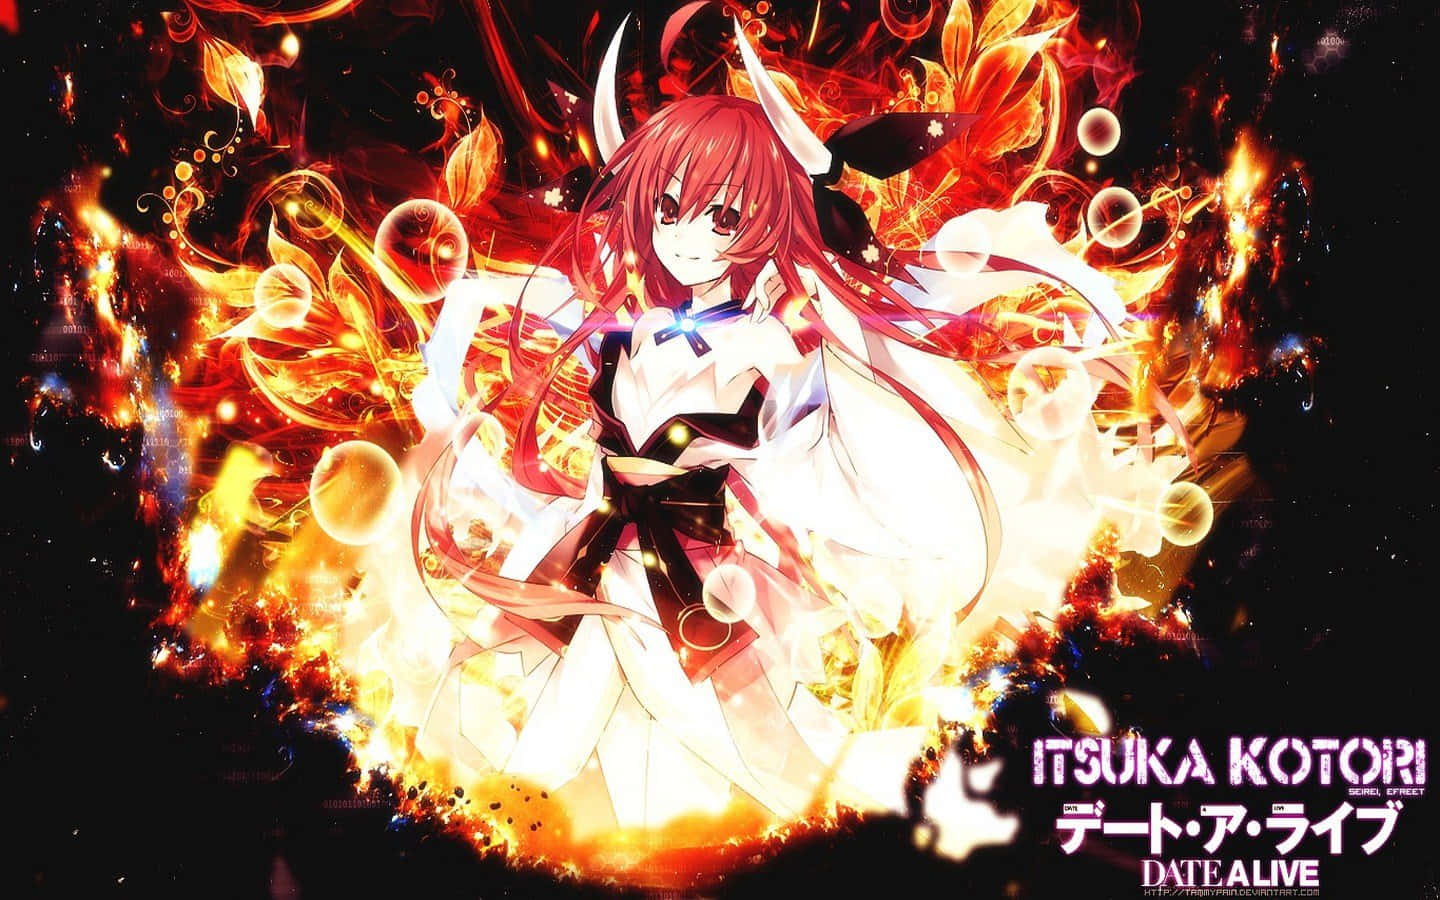 Follow the adventures of Shido Itsuka, the sole individual capable of sealing the mysterious Spirit power Wallpaper